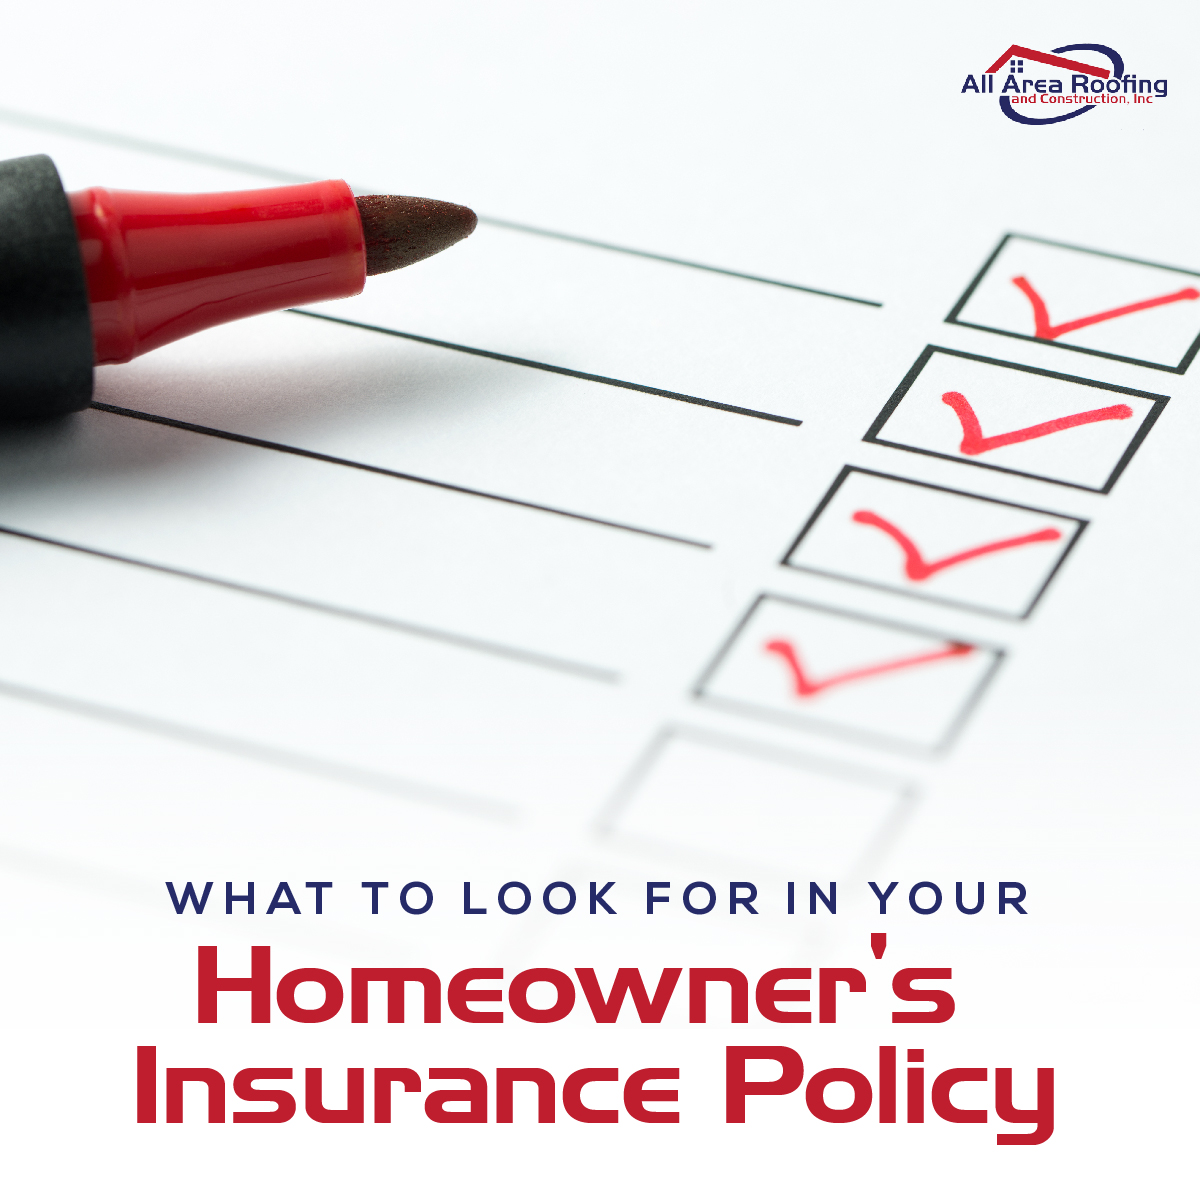 What to Look for In Your Homeowner’s Insurance Policy